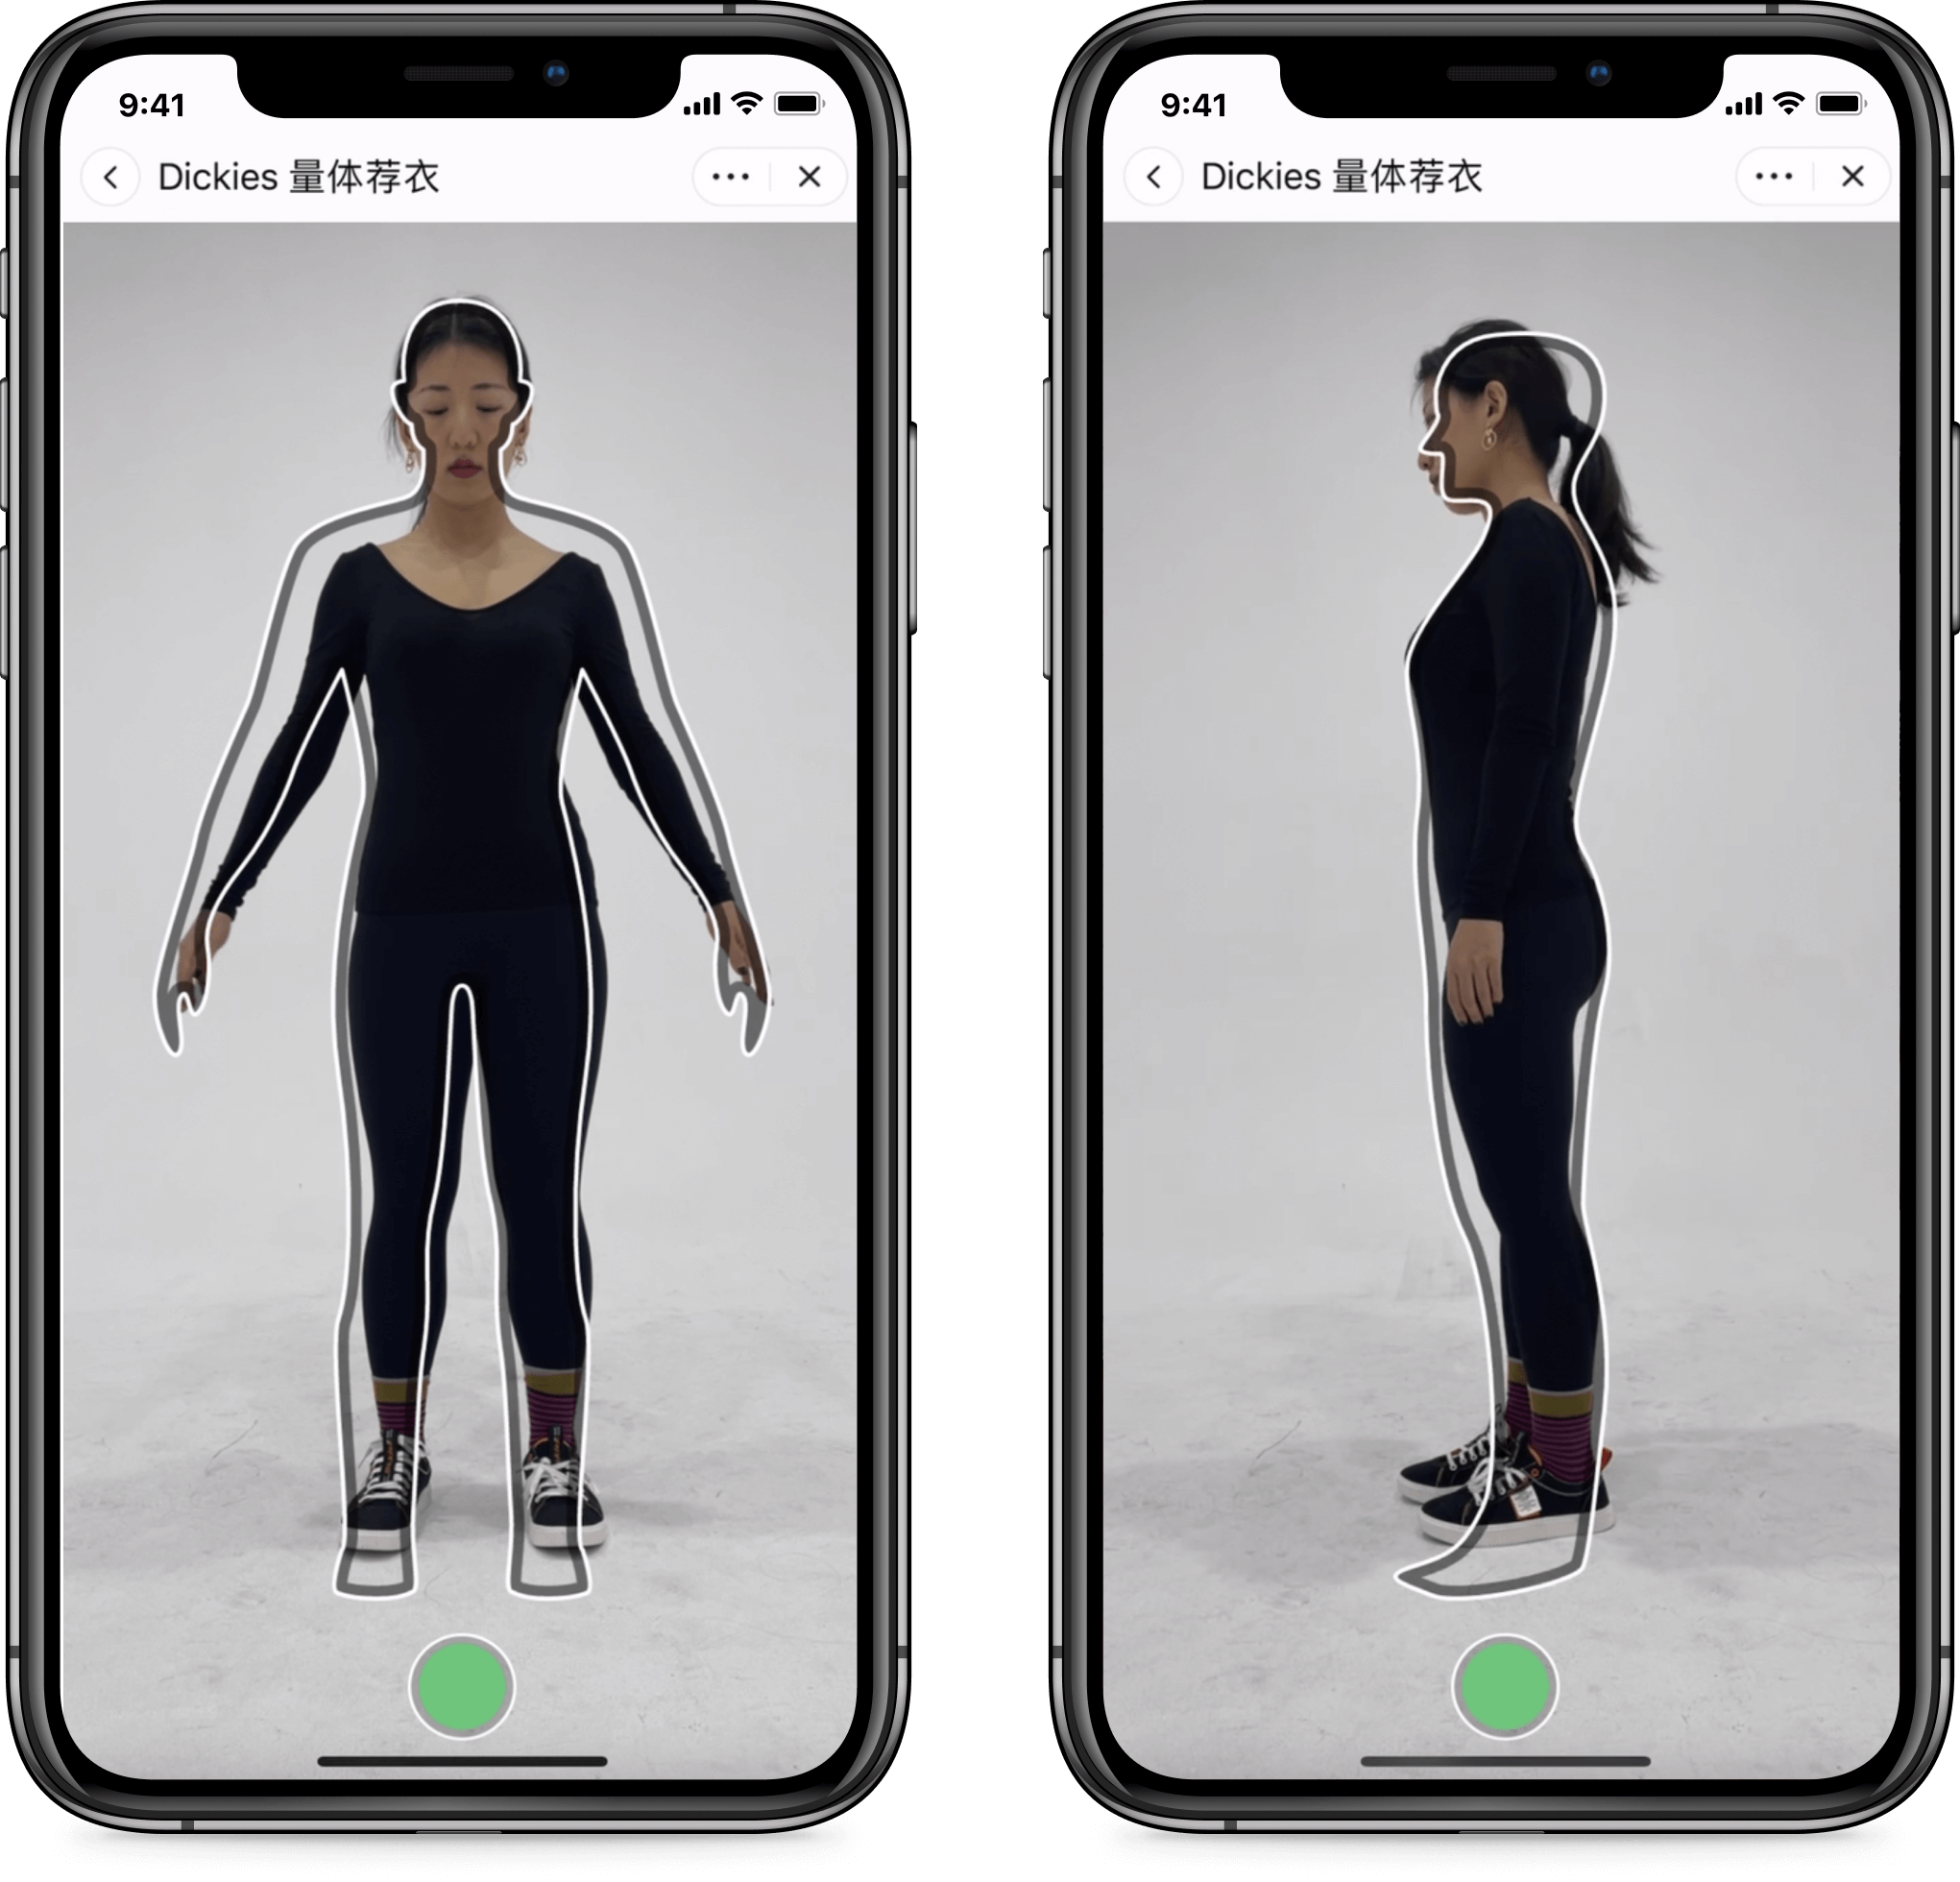 Two smartphones display a body measurement app by 3DLOOK, offering Tmall global shoppers a personalized fitting experience. A person in a black outfit stands with arms outstretched in front view on the left screen and in side view on the right screen.